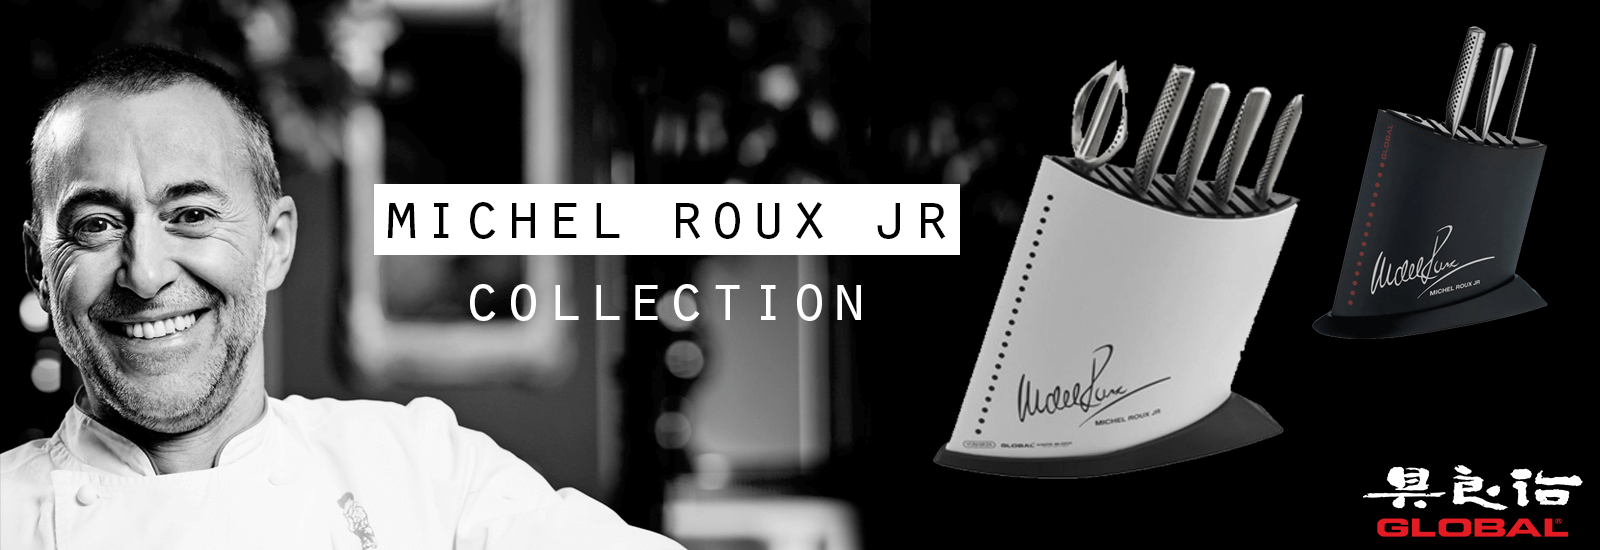 Global knives MICHEL ROUX JR Collection